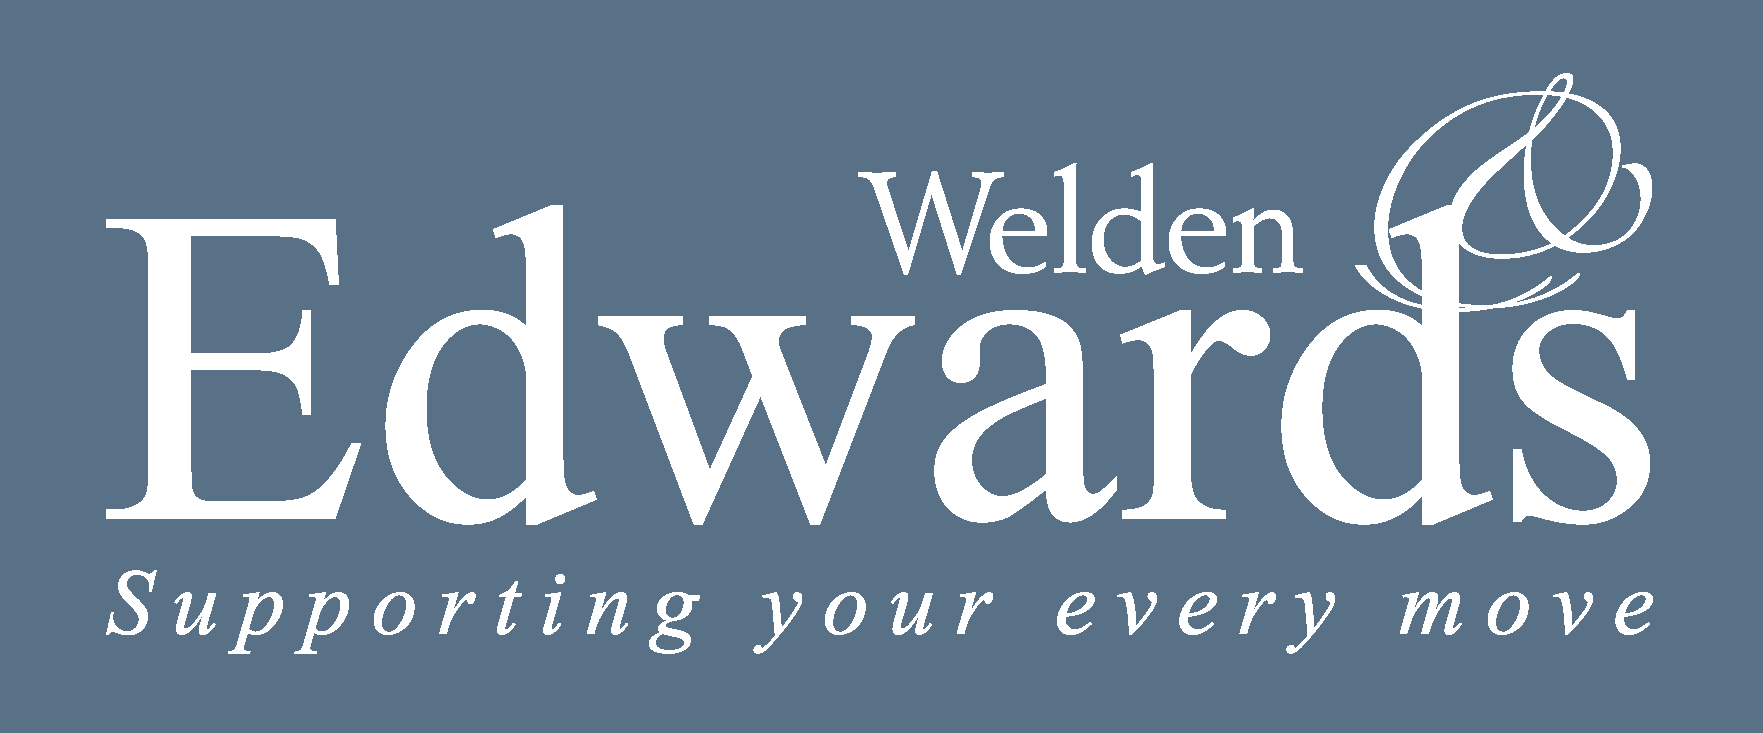 Edwards Logo - Welden & Edwards Supporting your every move